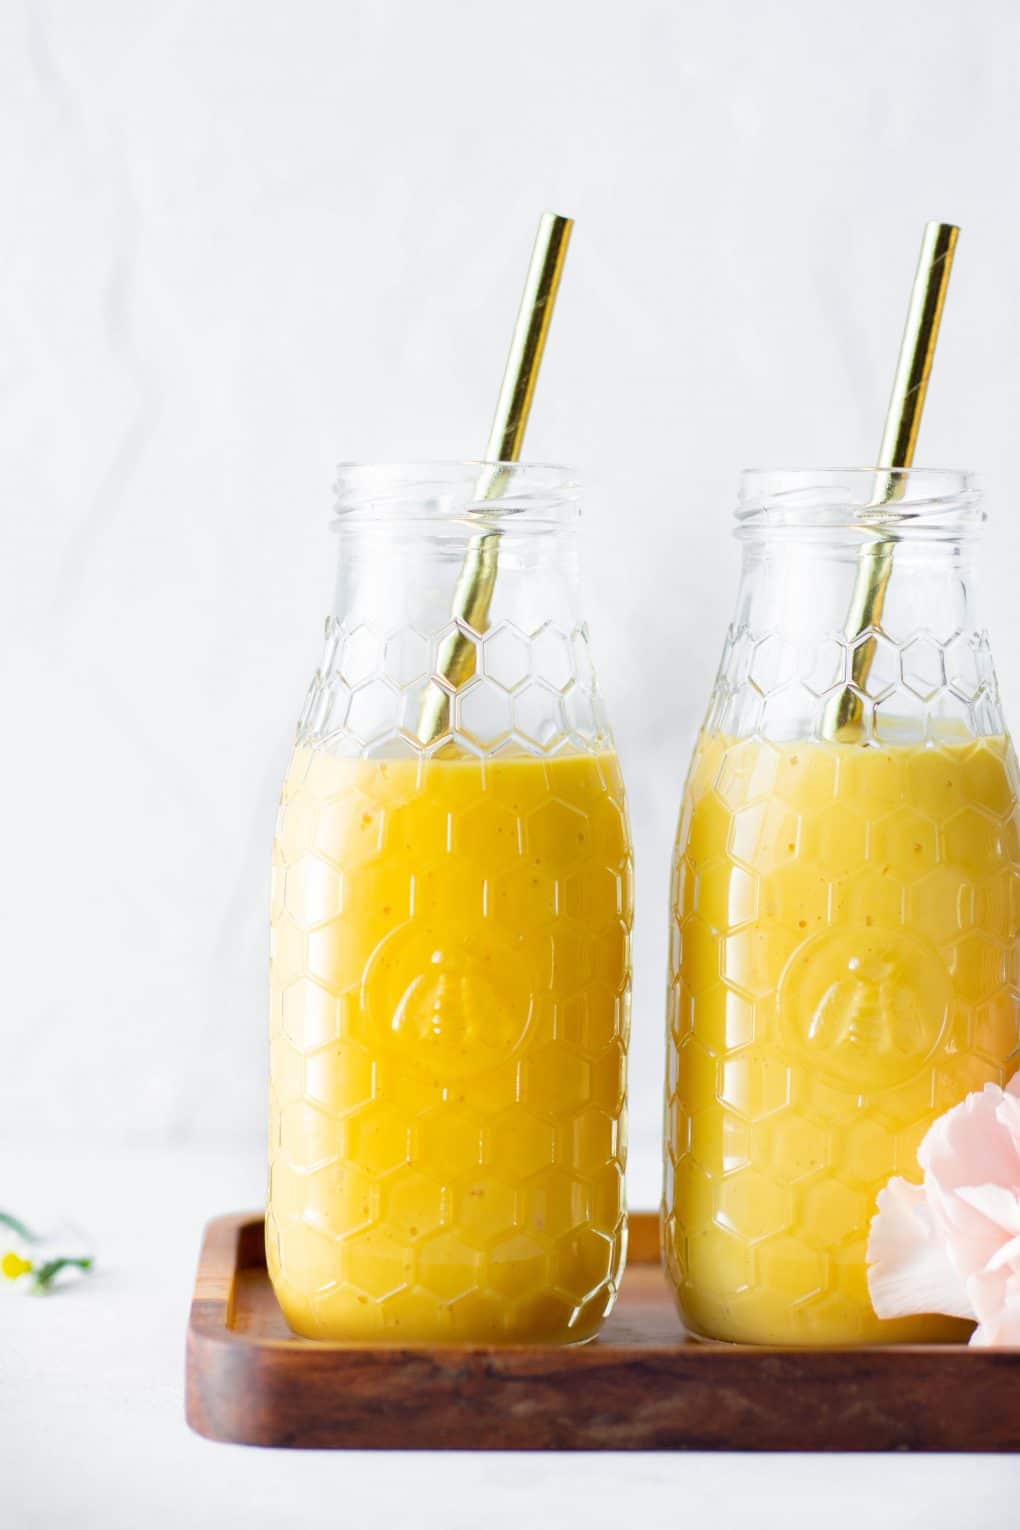 Close up side view of two bottles of a golden vegan mango lassi side by side on a small wooden platter against a white background